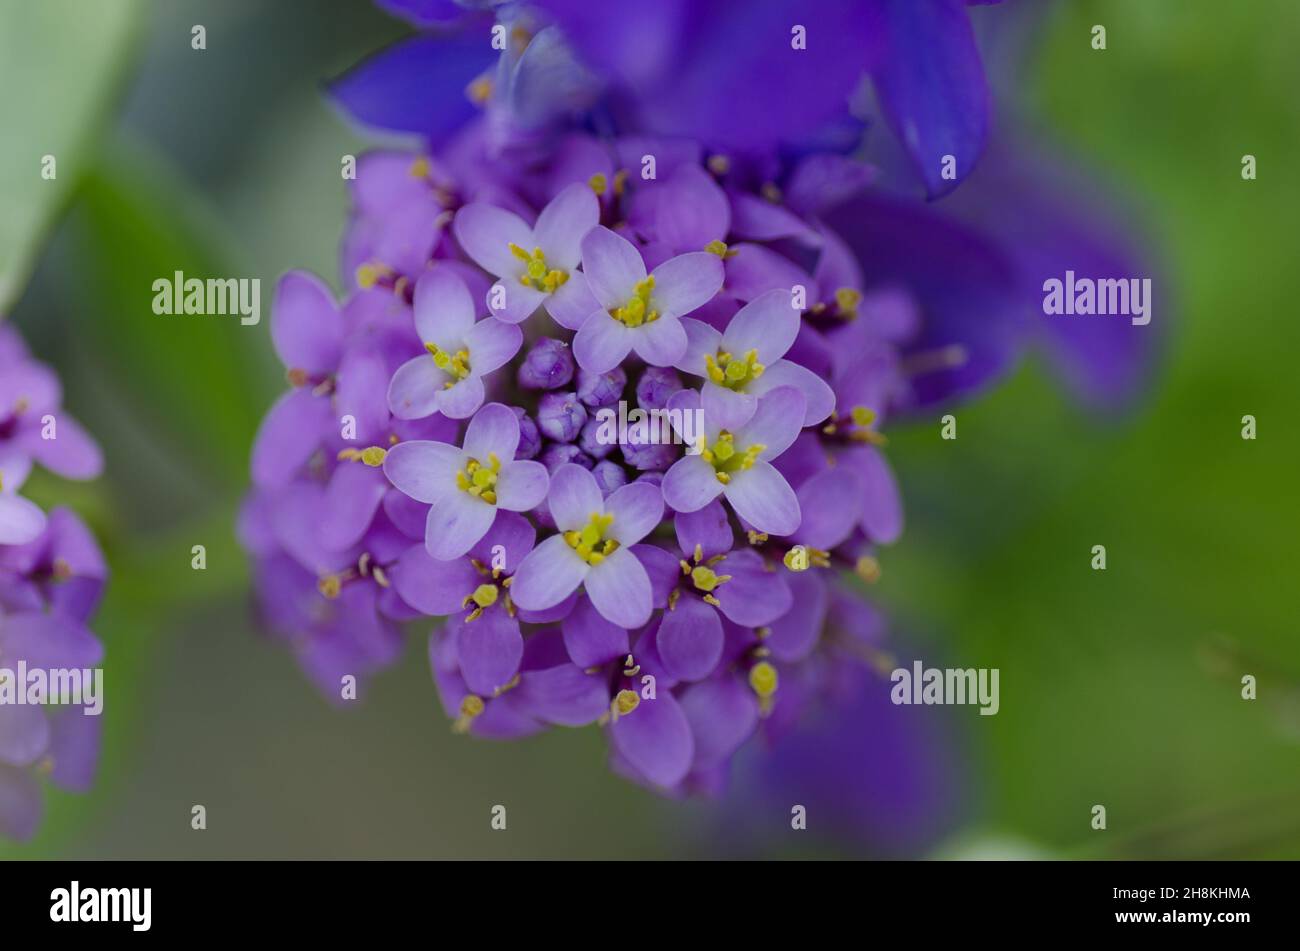 Close-up of a purple candytuft flower. Stock Photo